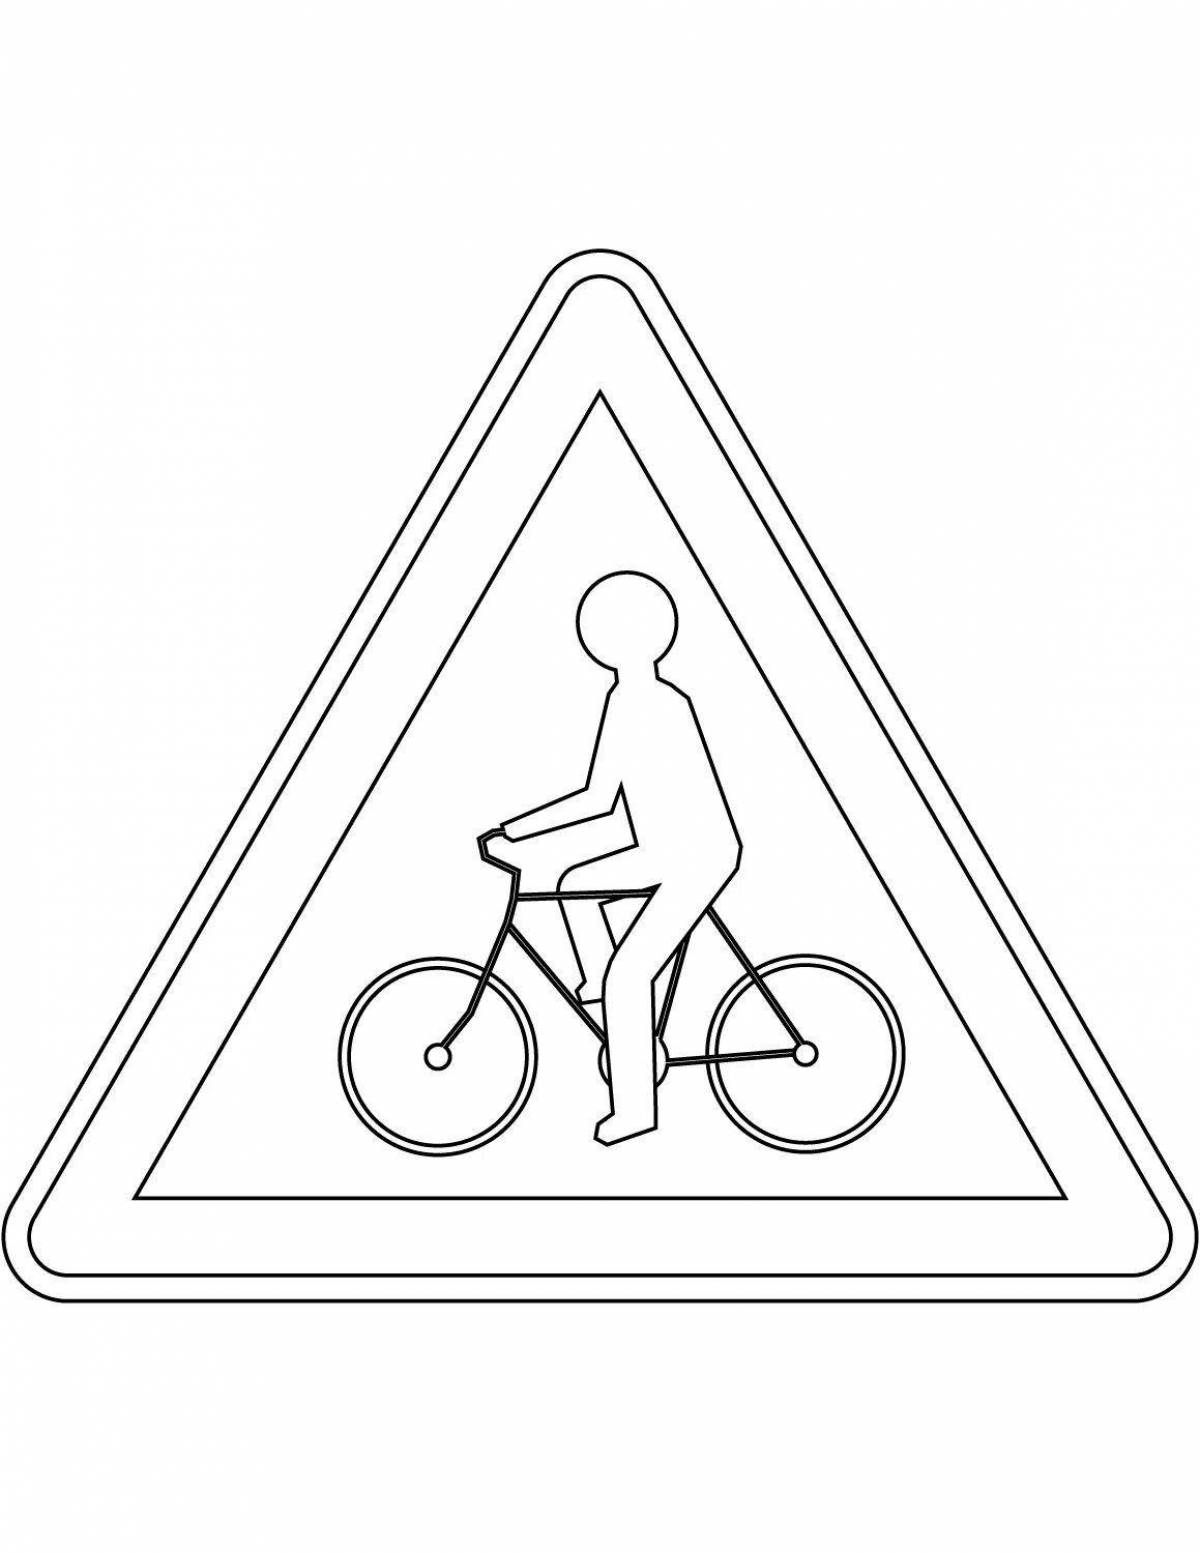 Happy bike path coloring page